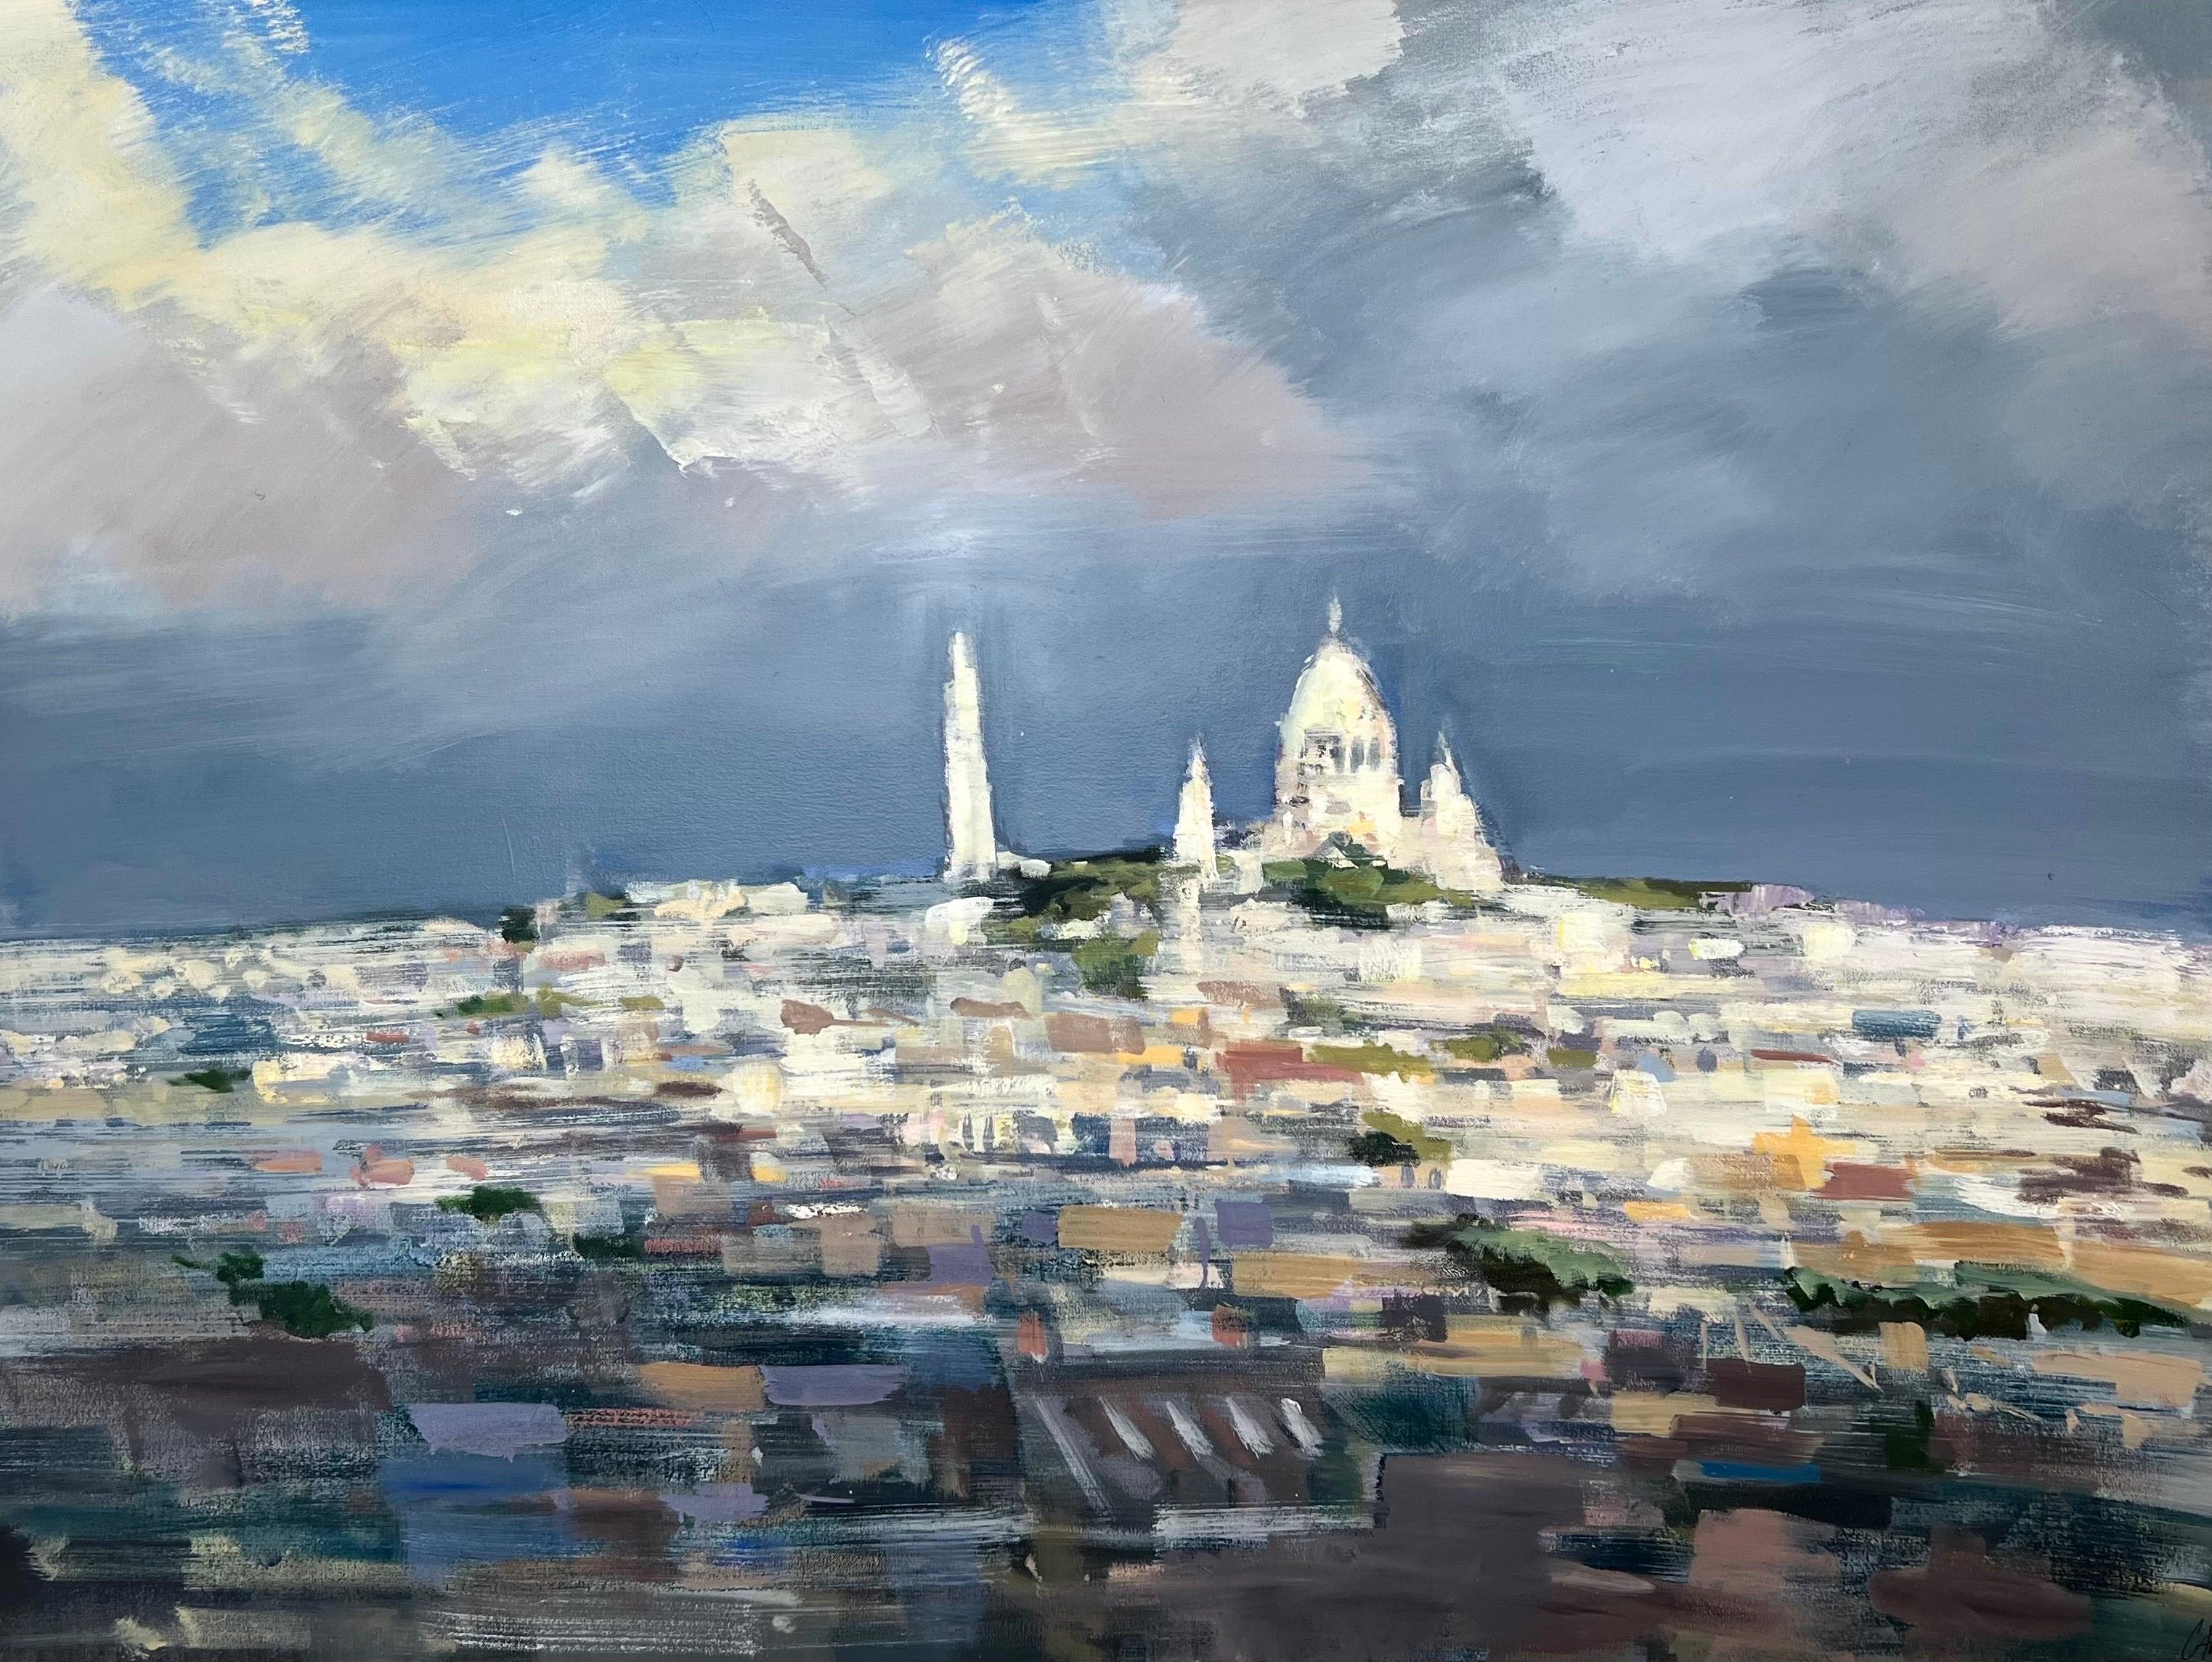 'Sacred Light (Sacre Coeur, Paris)' is a large horizontal representational oil on canvas painting of Sacre Coeur and Montmartre in Paris created by American artist Craig Mooney in 2022. Featuring an exquisite palette mostly made of French gray,